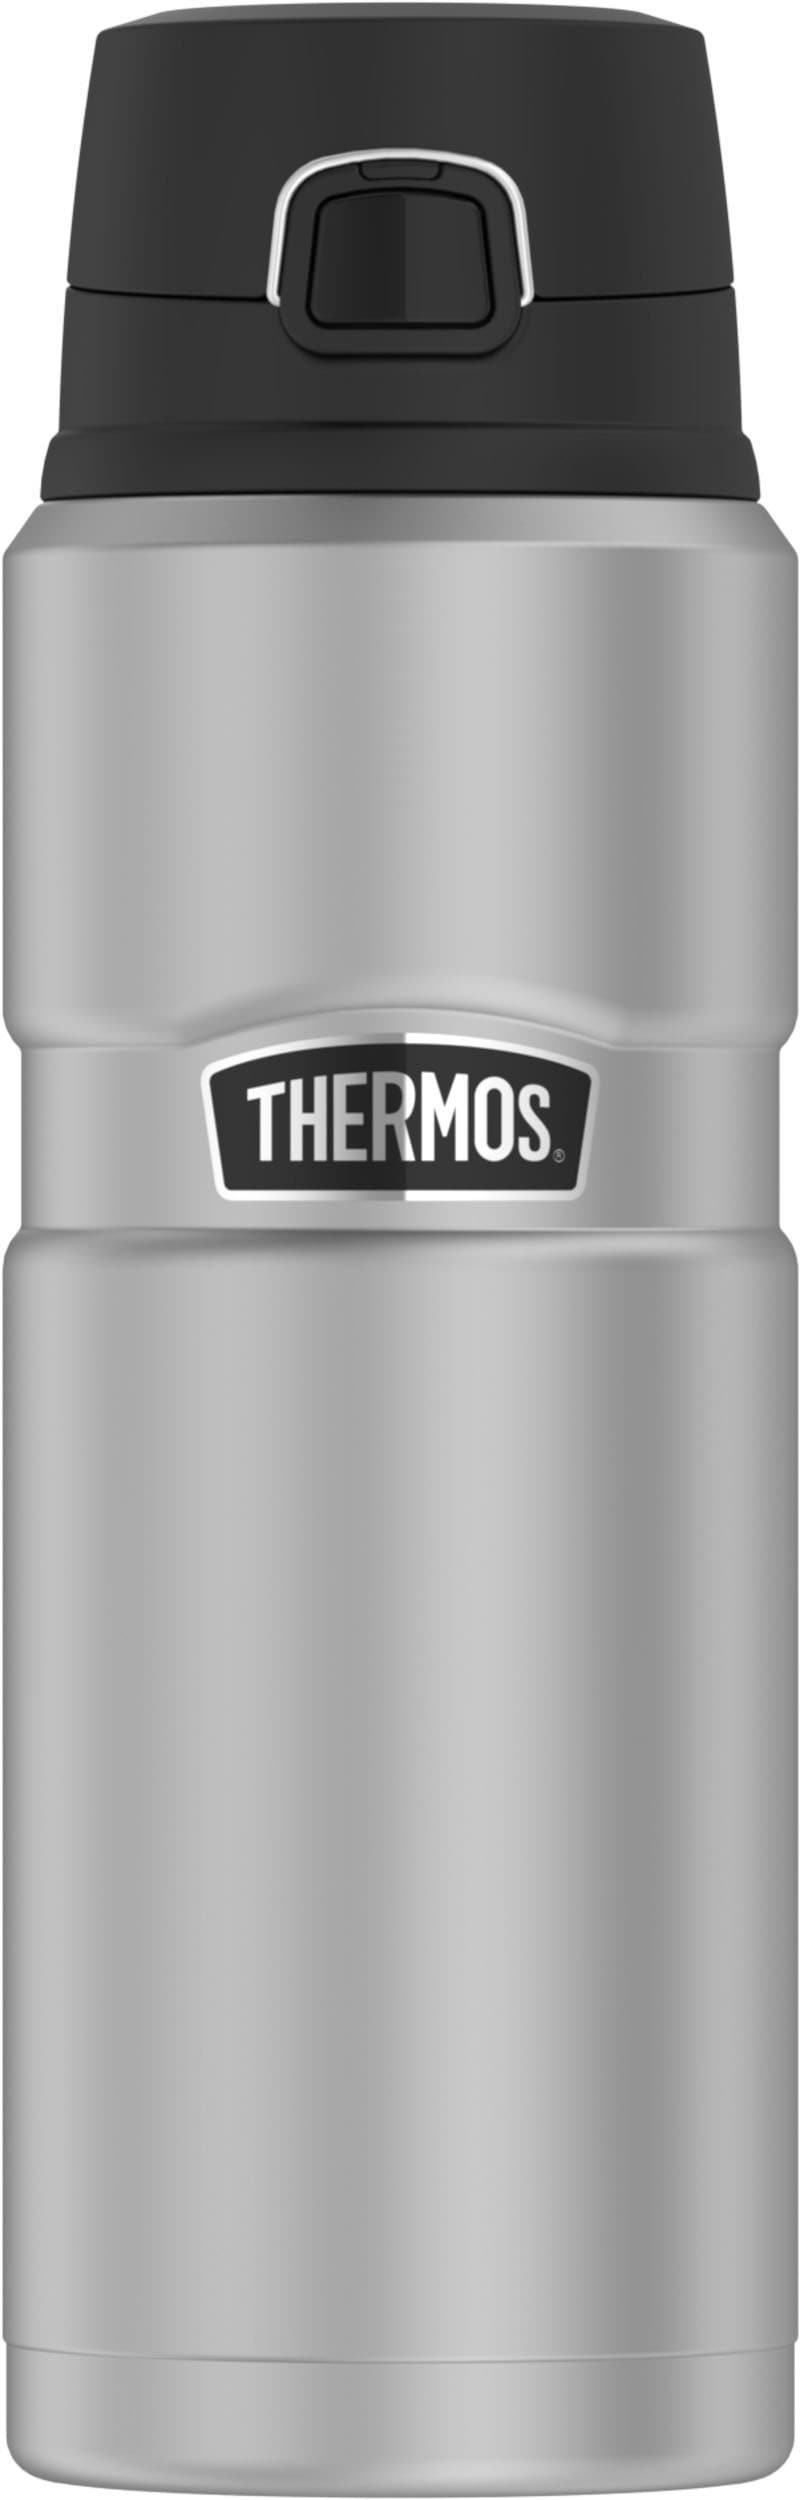 THERMOS Thermoflasche "Stainless King", Edelstahl, 0,7 Liter